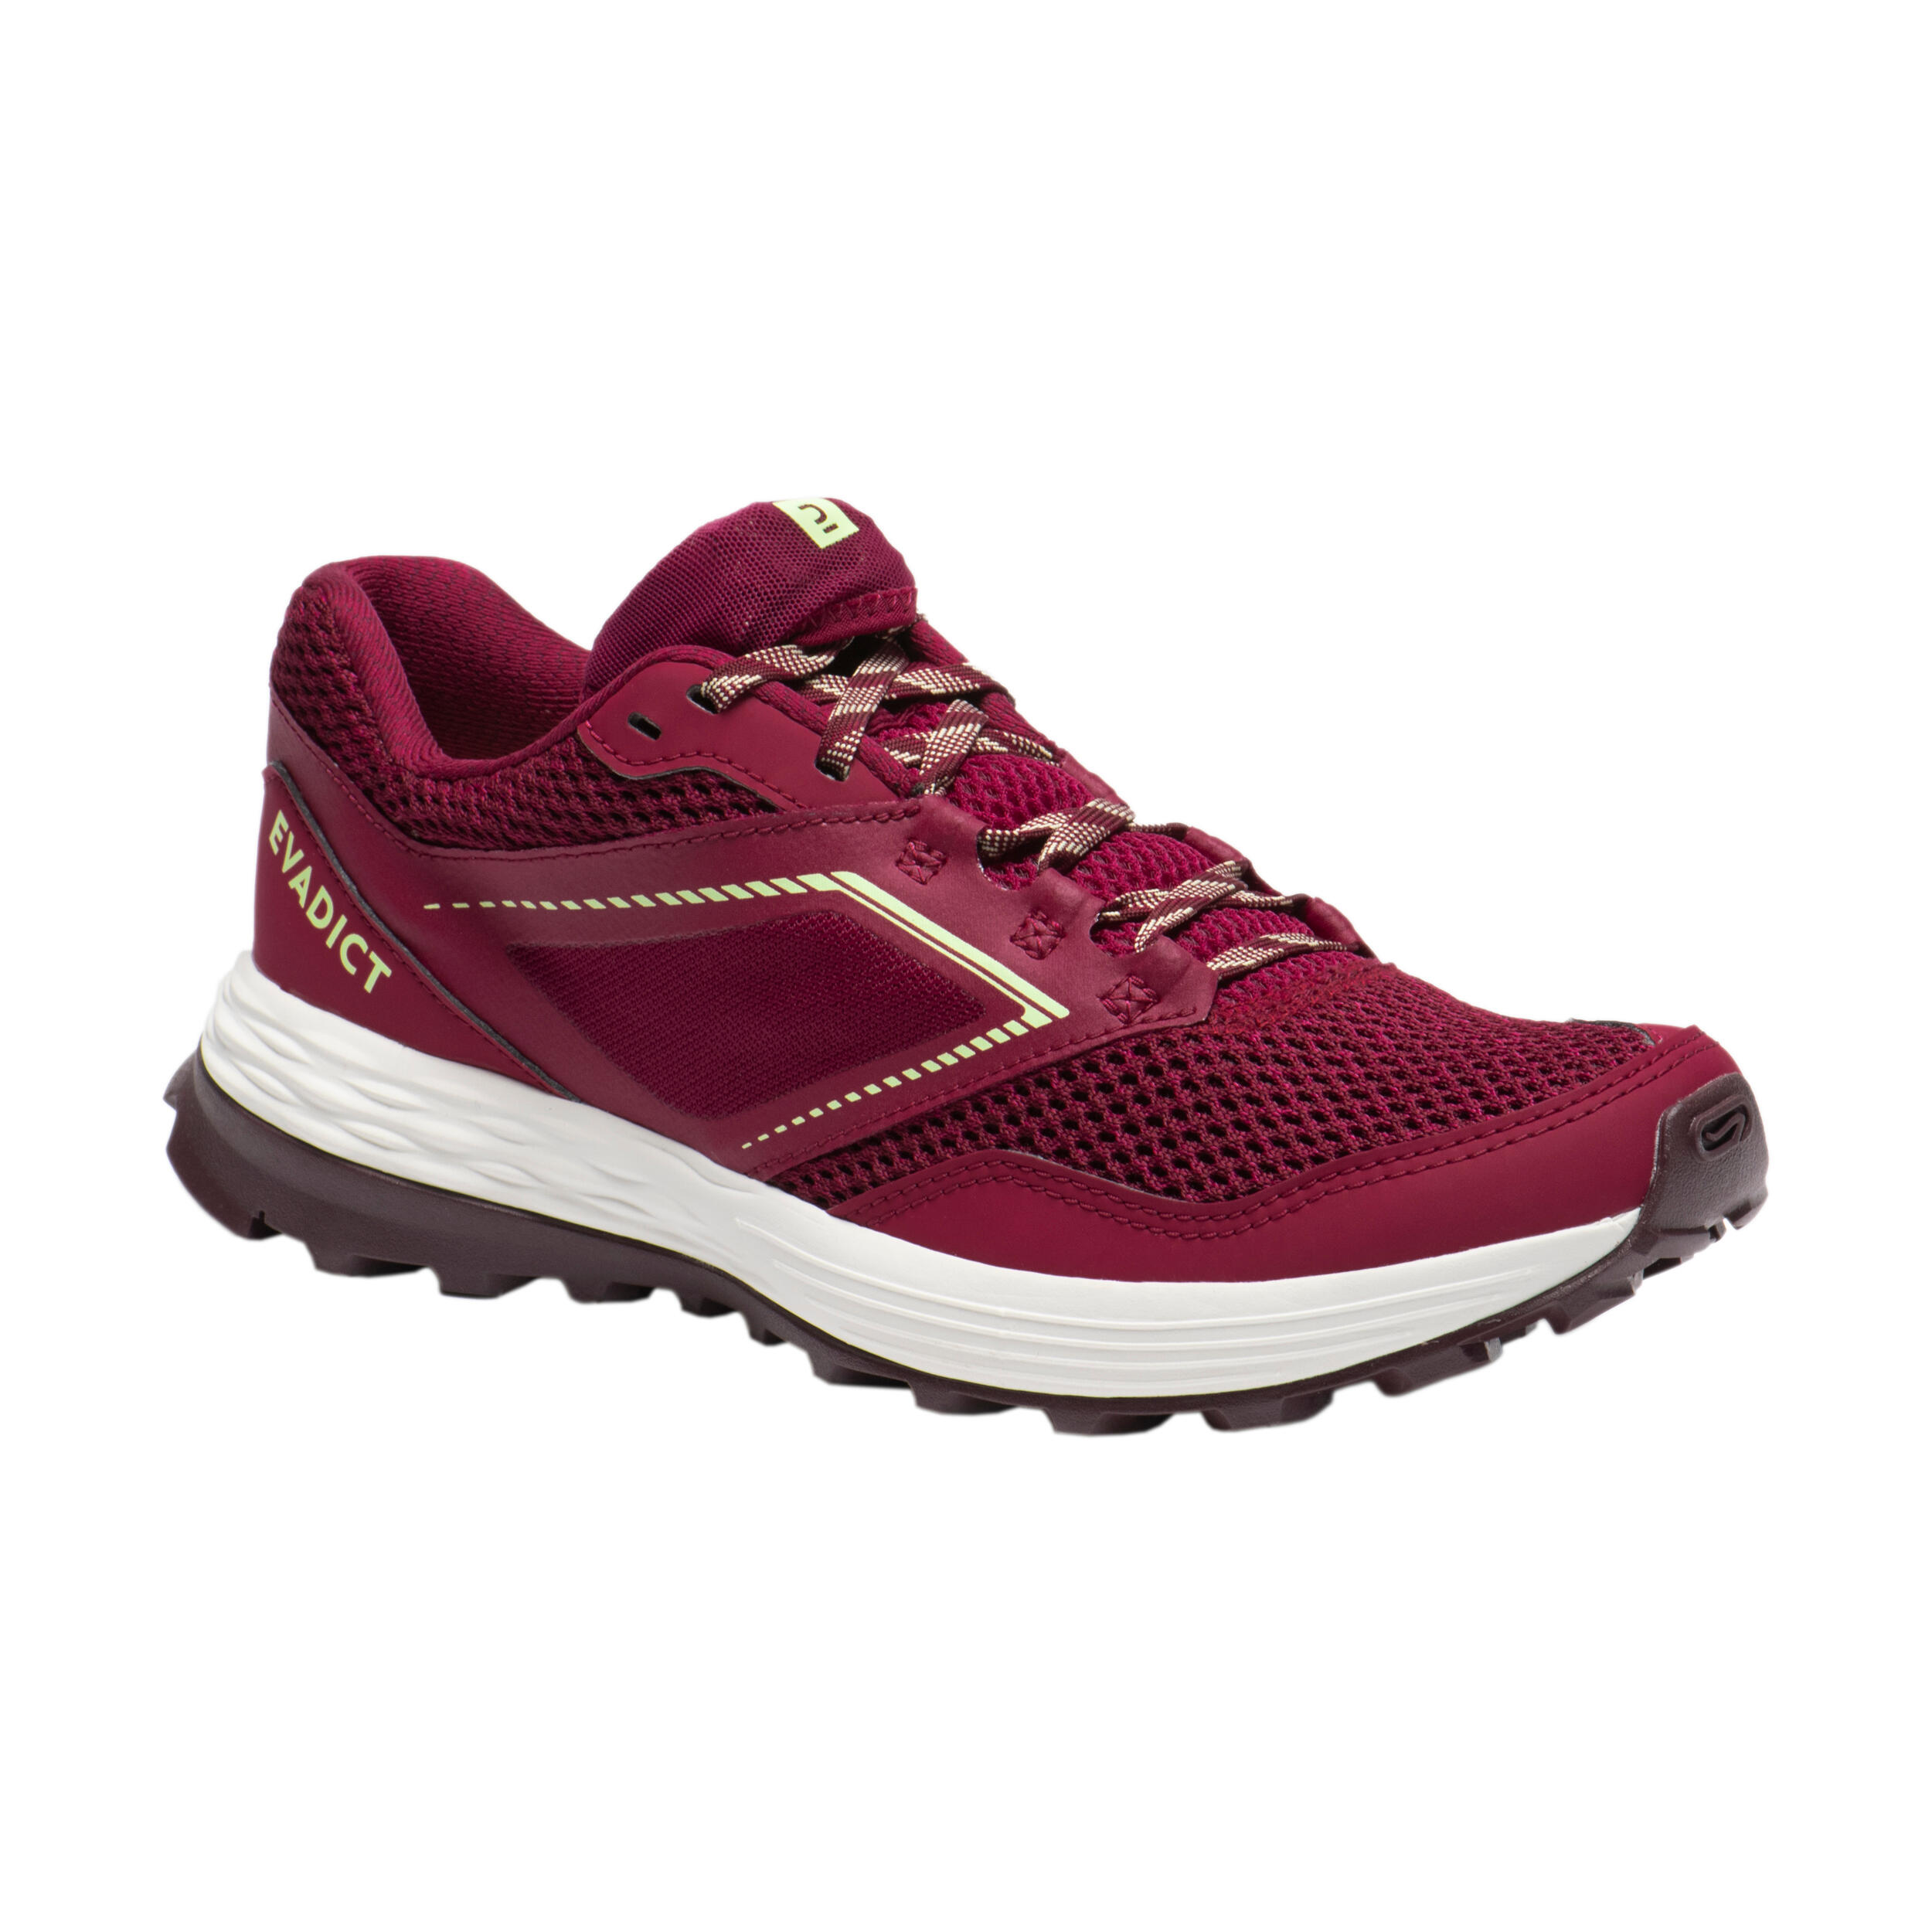 Evadict TR, Trail Running Shoes, Women's